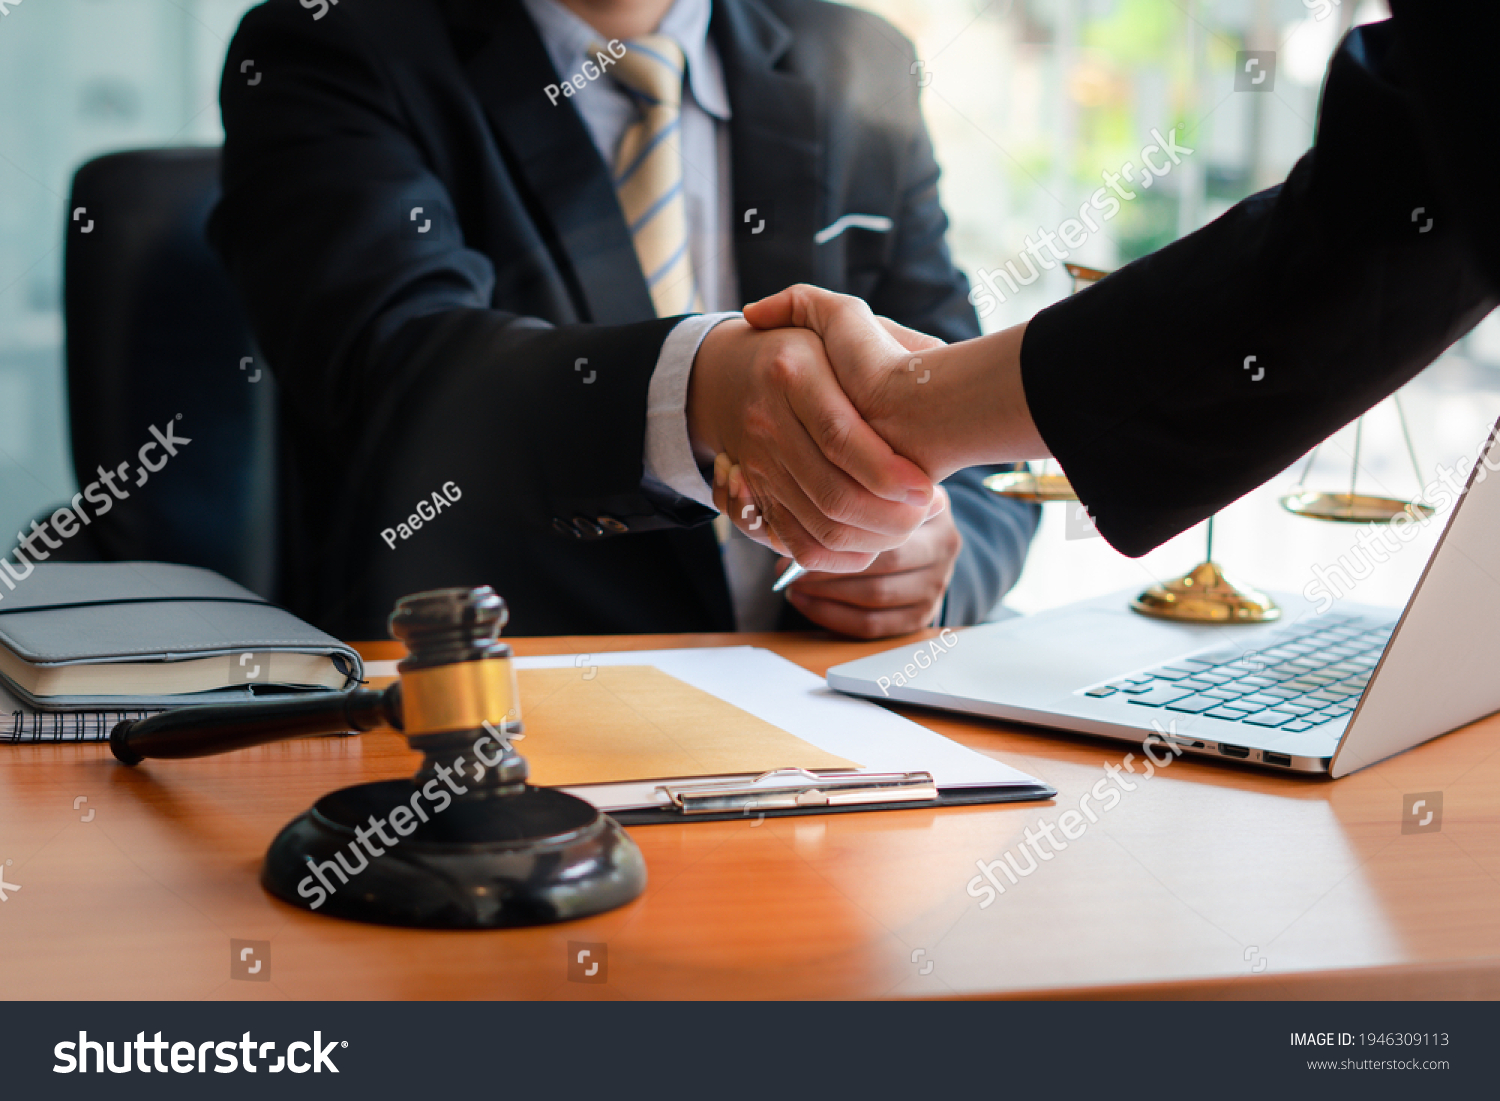 Businessman shaking hands to seal a deal with his partner
lawyers or attorneys discussing a contract agreement.Legal law, advice, and justice concept. #1946309113